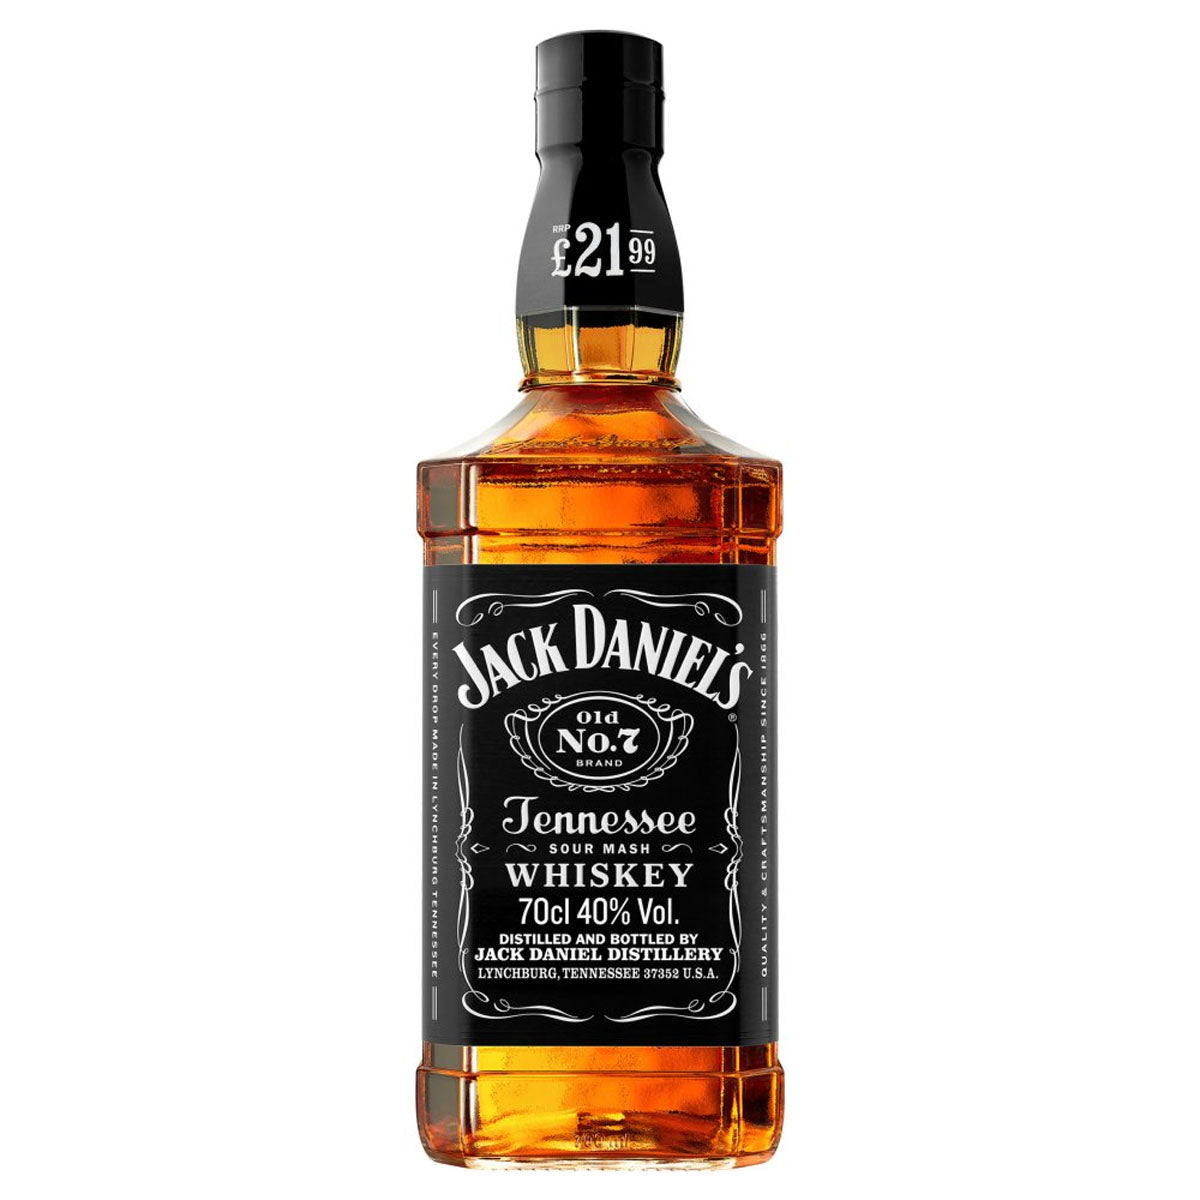 A bottle of Jack Daniels - Old No. 7 Tennessee Whiskey (40.0% ABV) - 70cl.